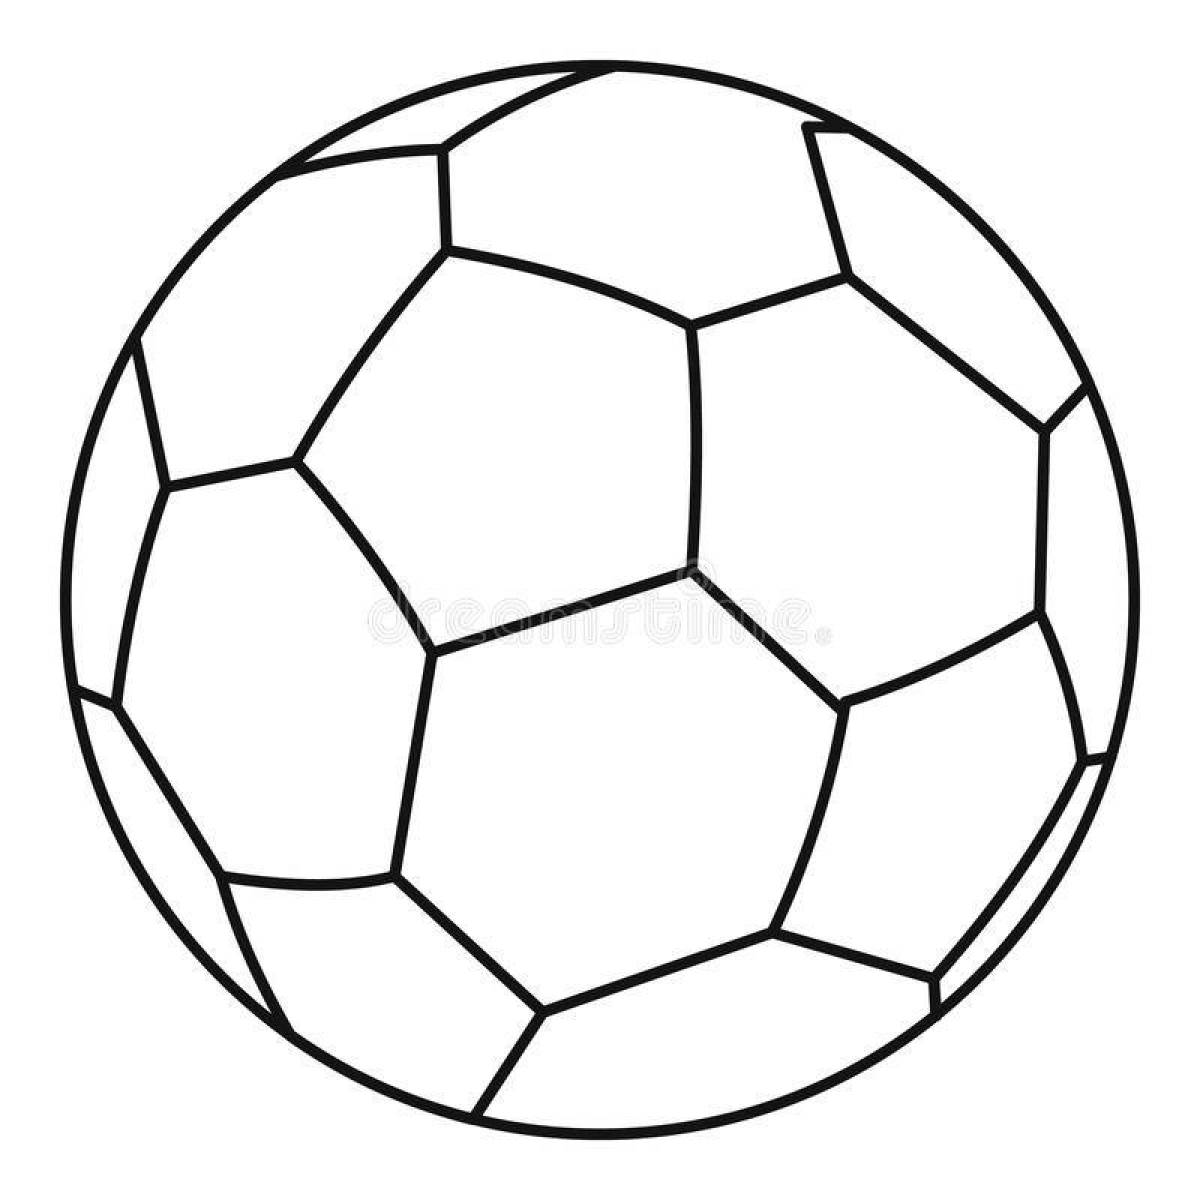 Coloring page wonderful soccer ball